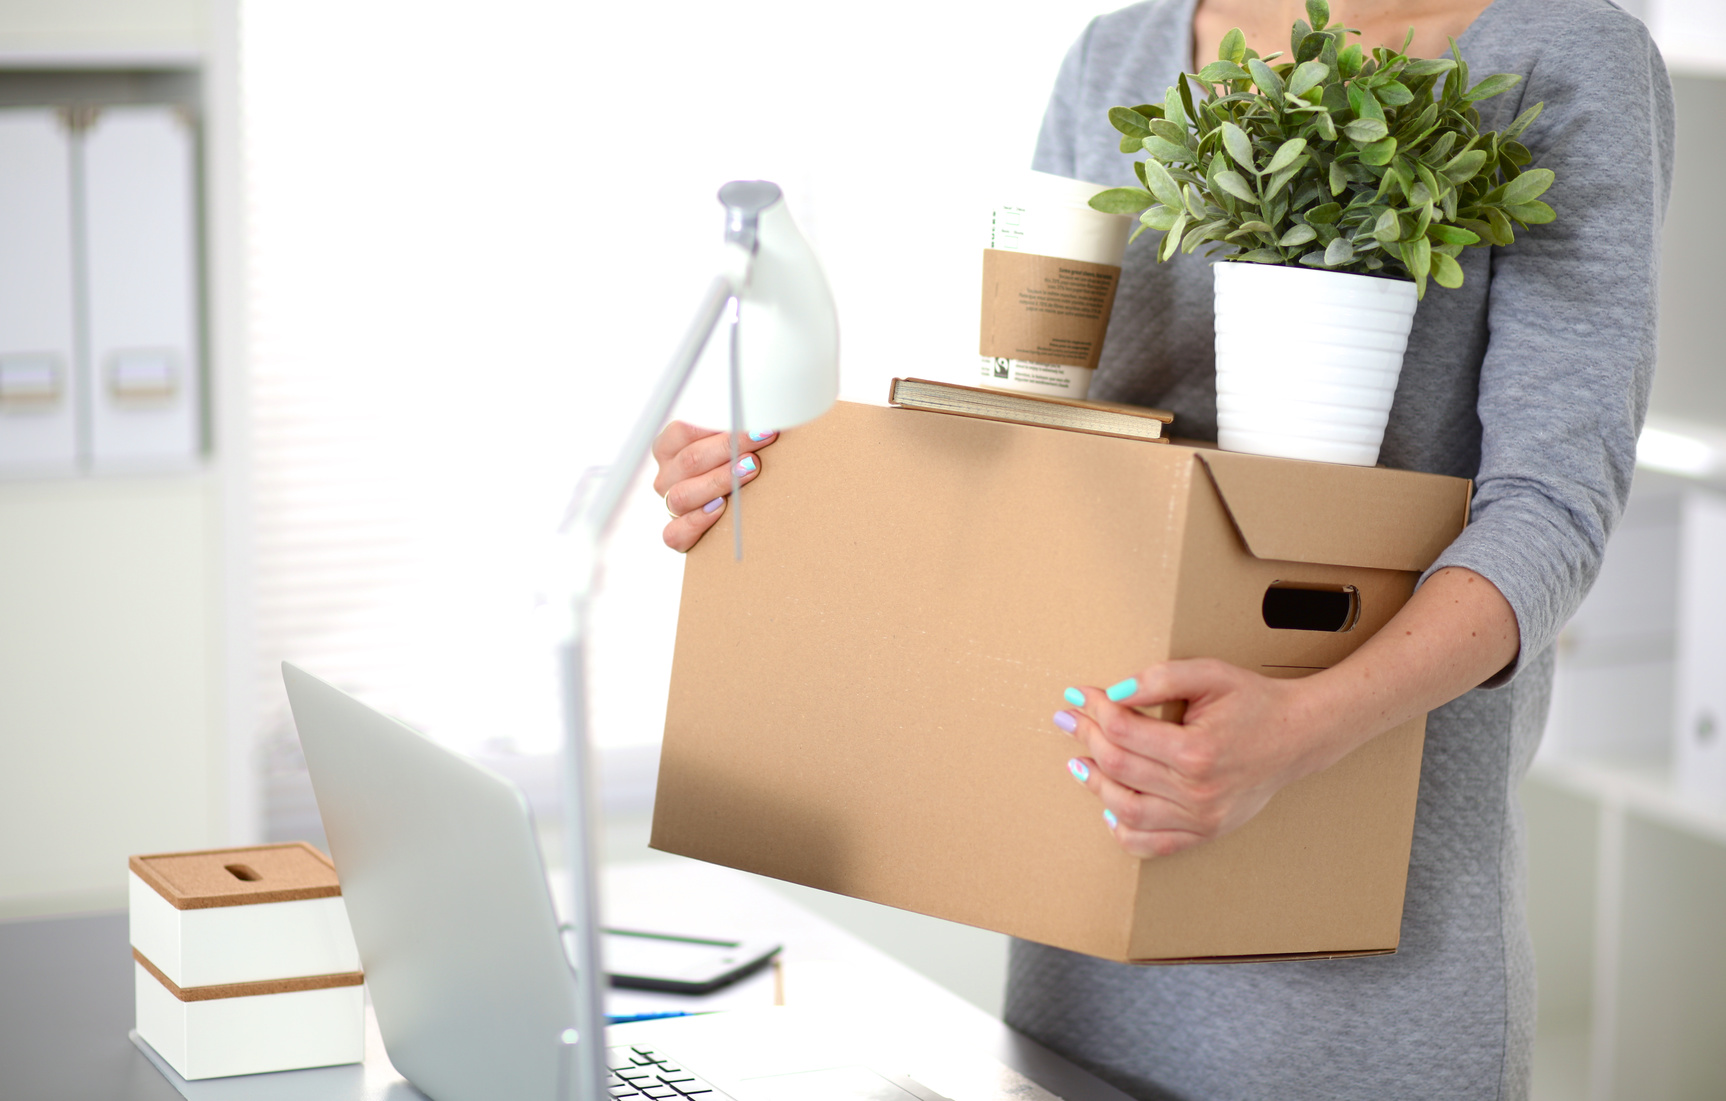 Moving Your Office by supercheaprubbishremoval.com.au